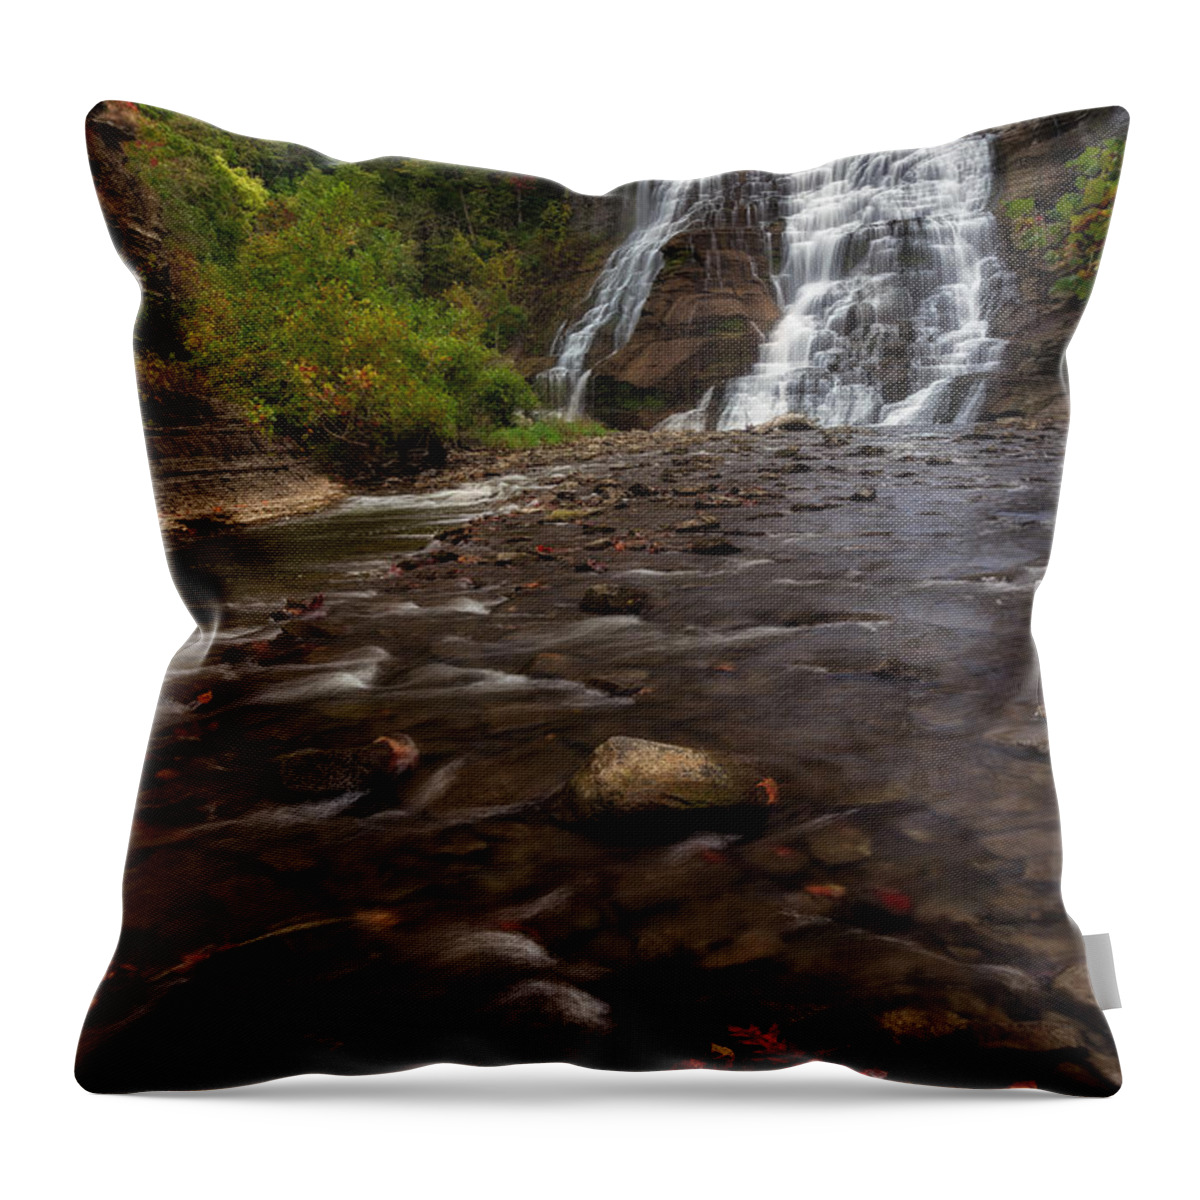 Ithaca Falls Throw Pillow featuring the photograph Ithaca Falls 2 by Mark Papke